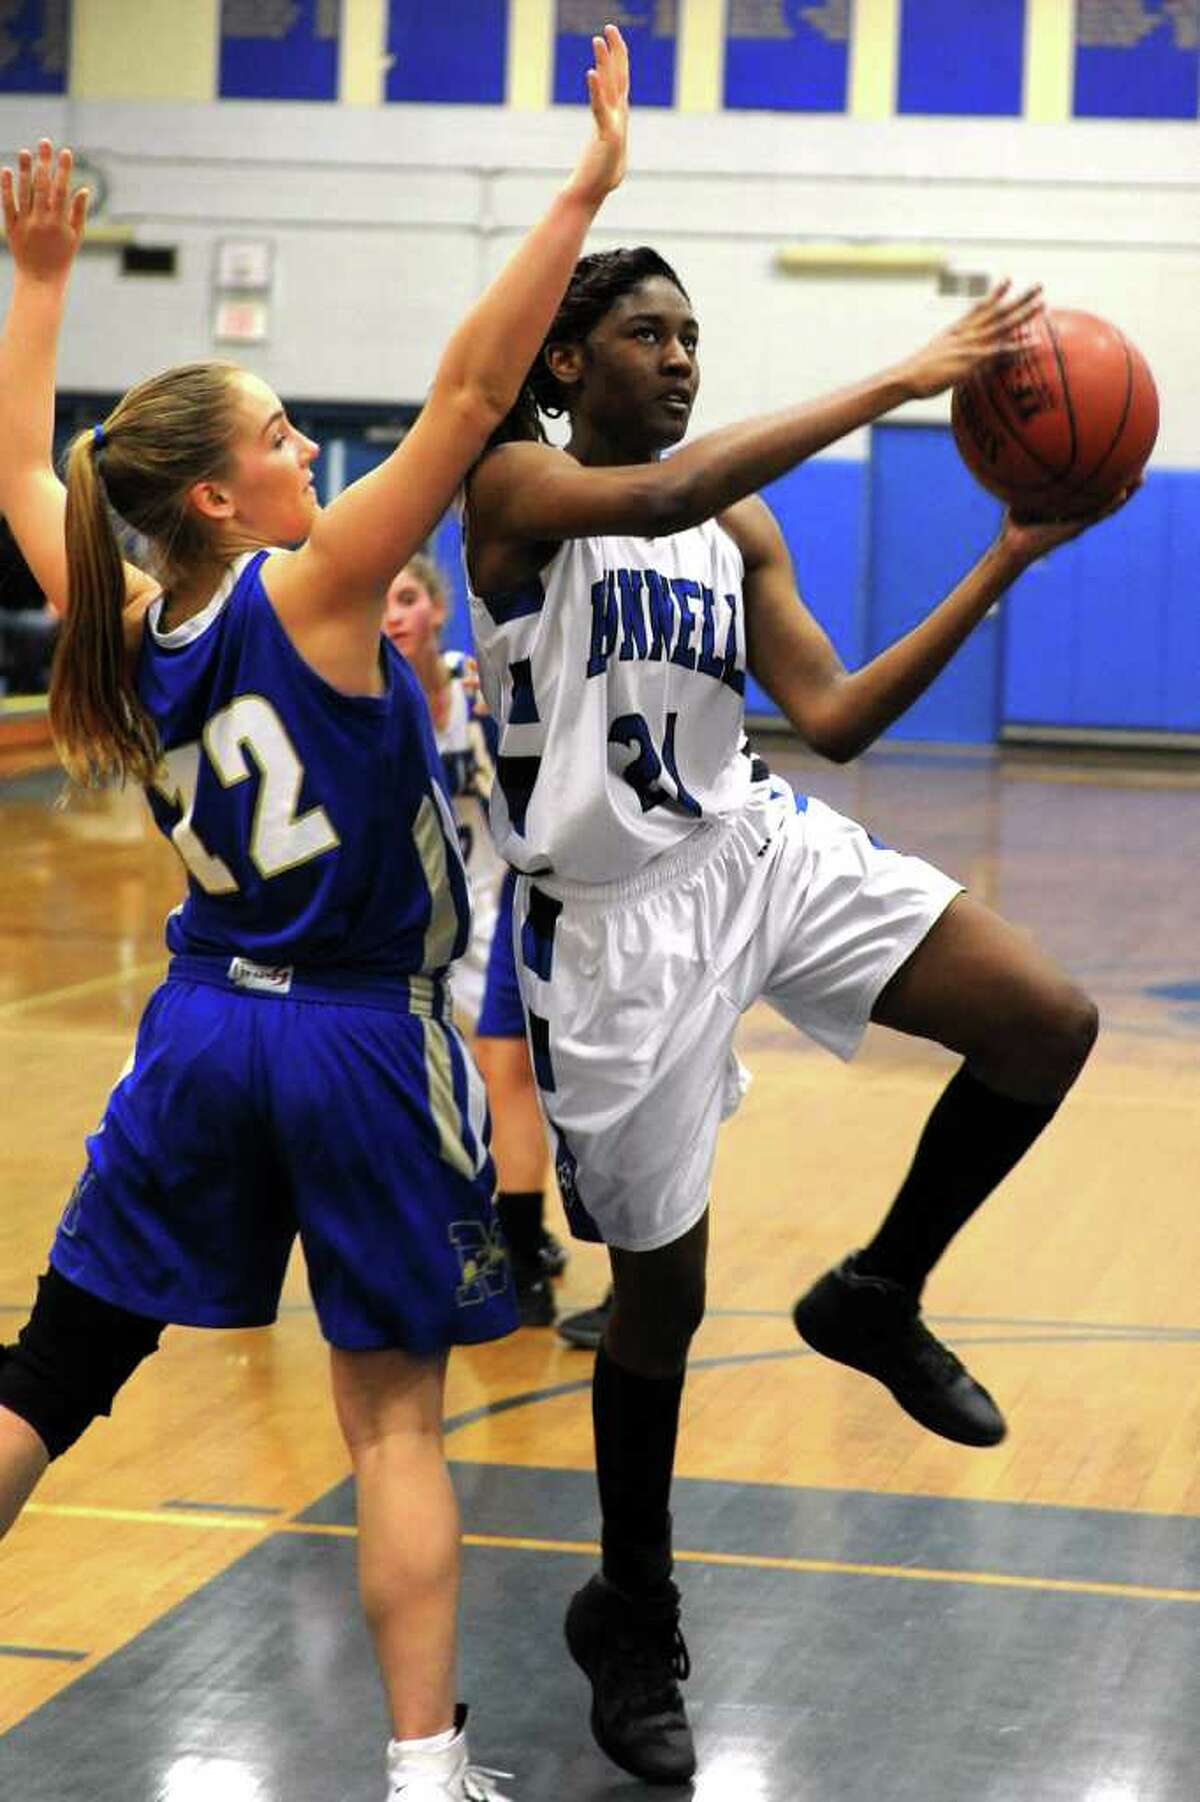 Bunnell's Shaquira Palmer drives to the net past Newtown's Carly Iwanicki during girls basketball action at Bunnell High School, in Stratford, Conn. Dec. 12th, 2011.